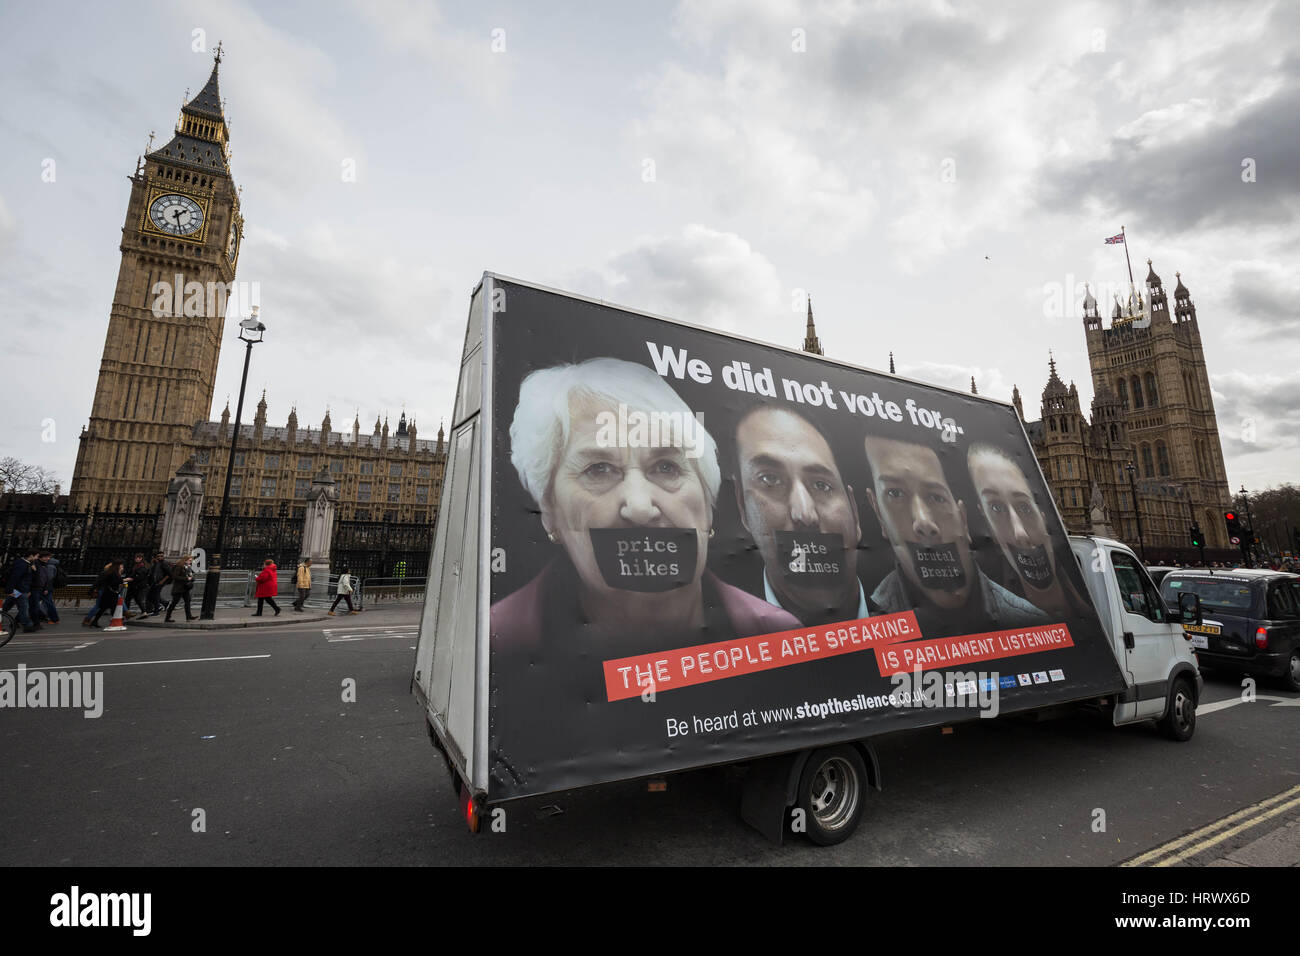 London, UK. 4th March, 2017. Anti-Brexit billboard is driven around Westminster © Guy Corbishley/Alamy Live News Stock Photo